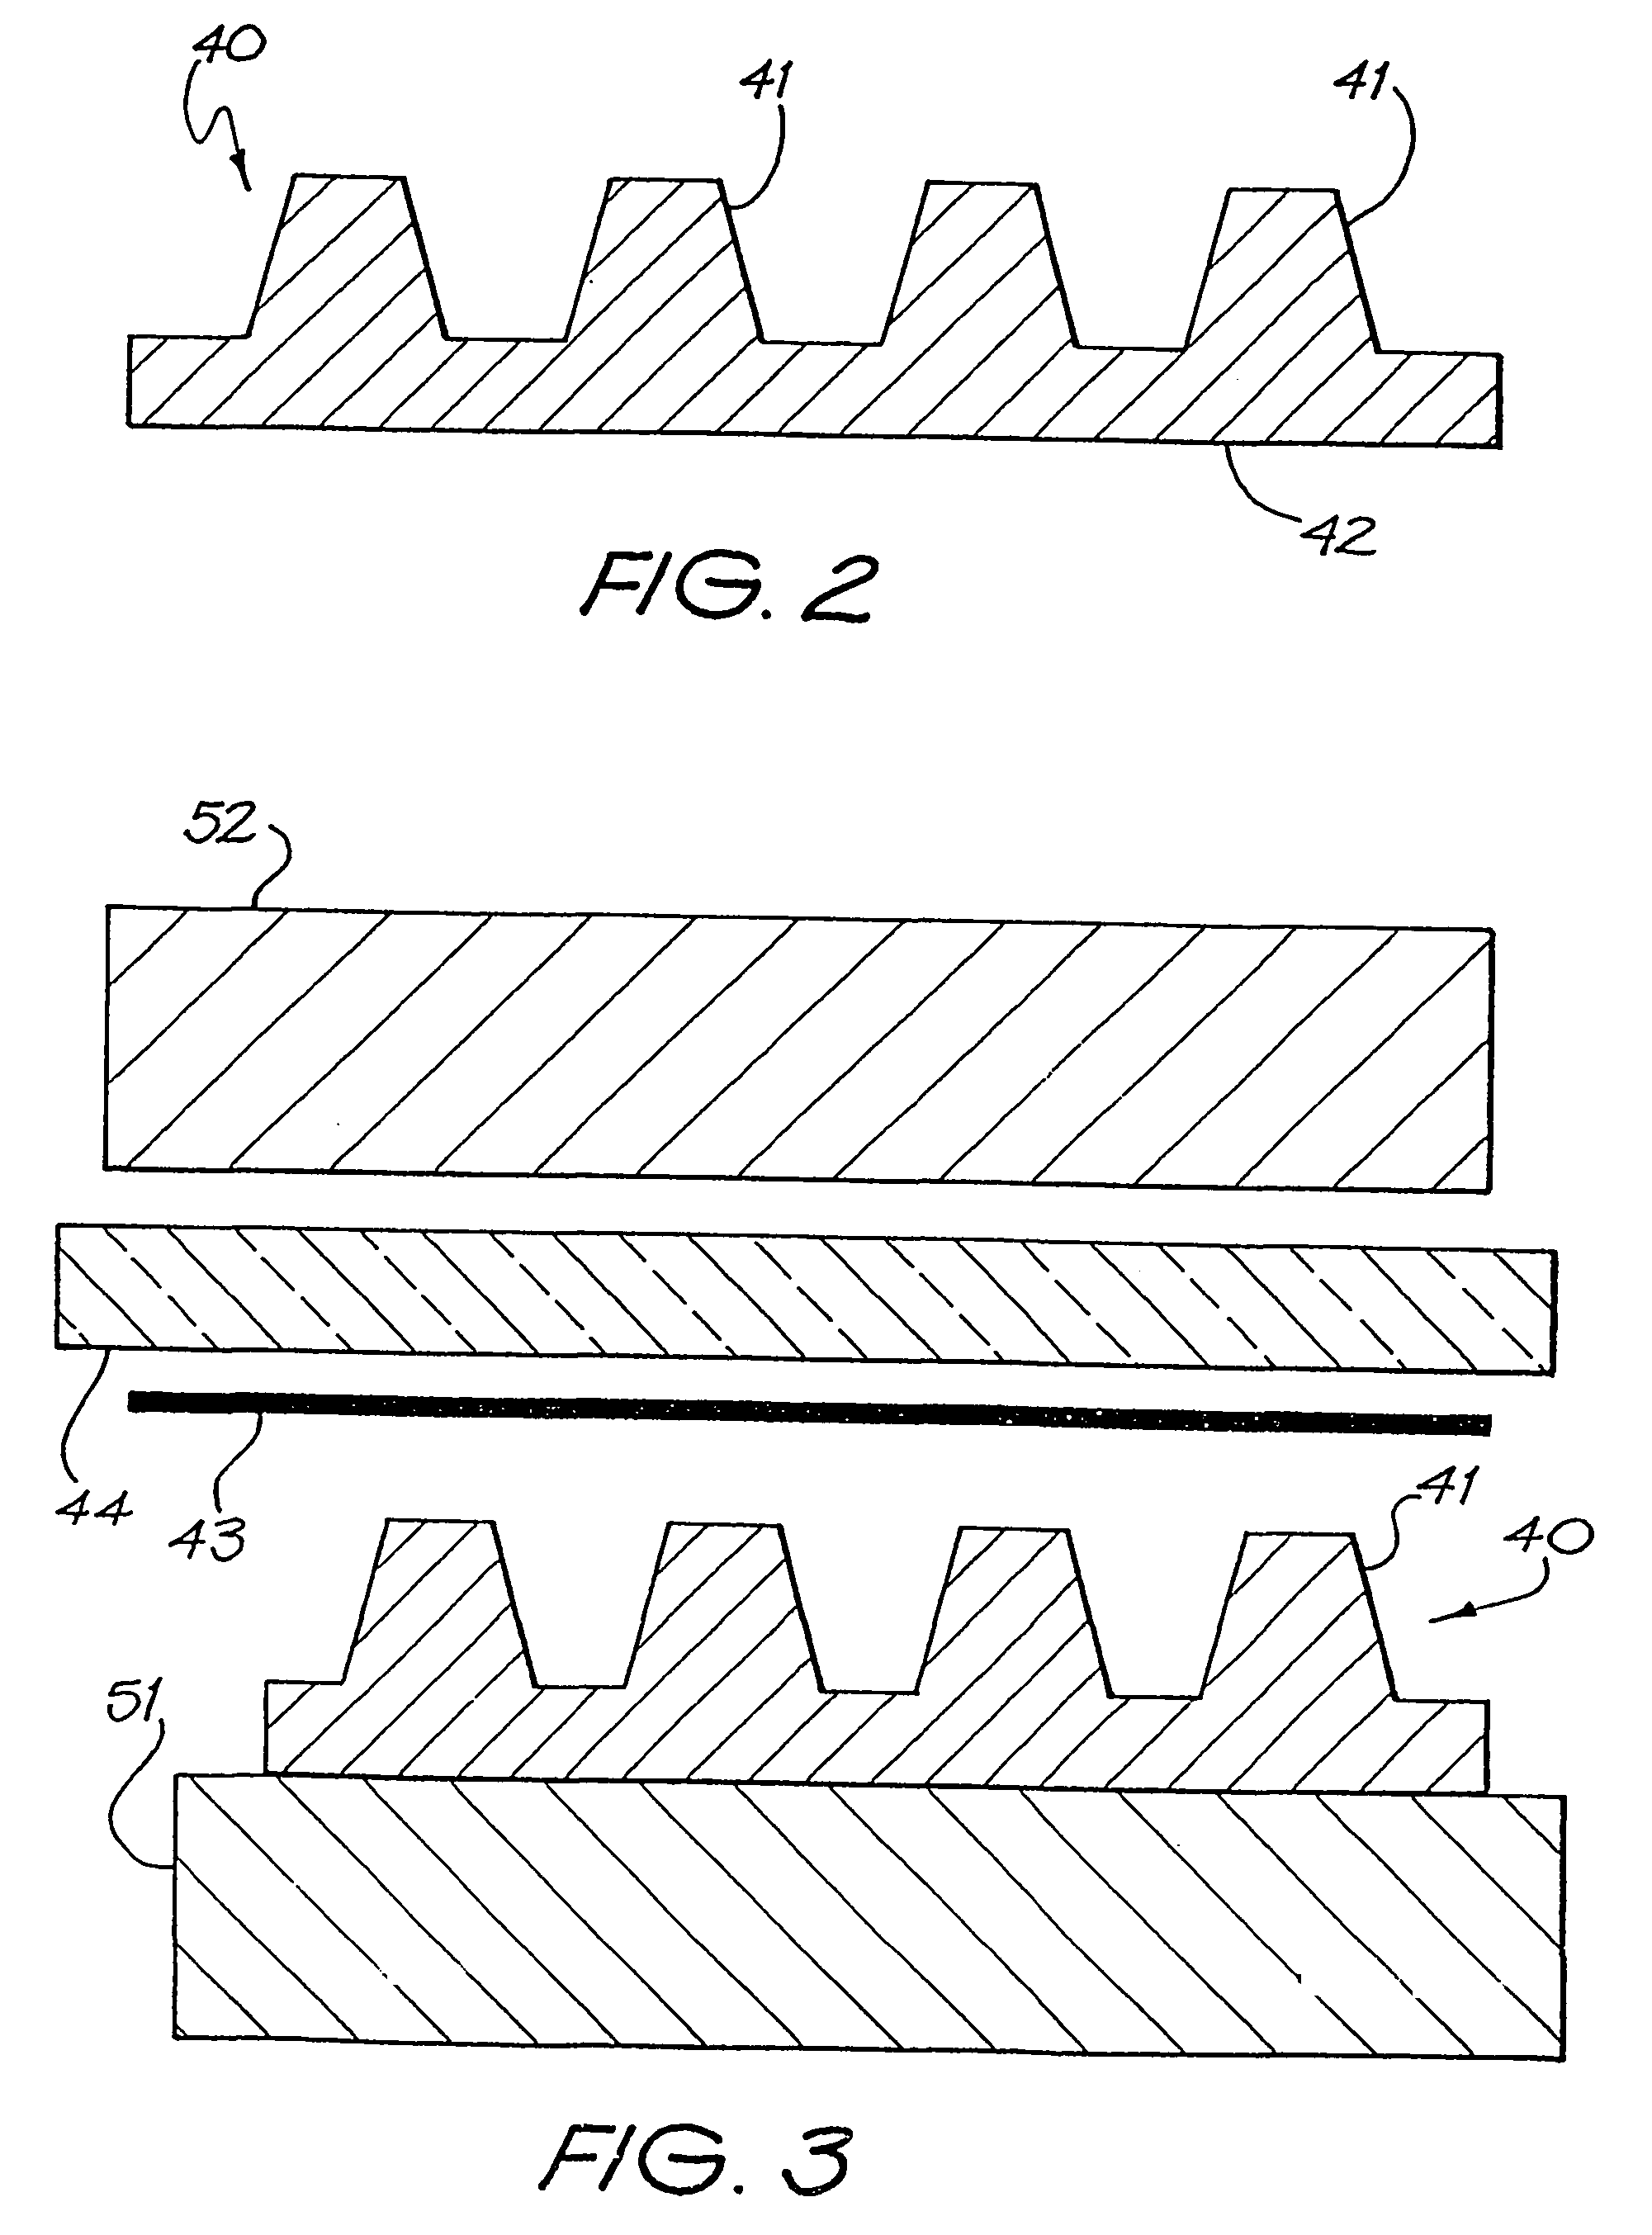 Process for manufacturing electrically conductive components